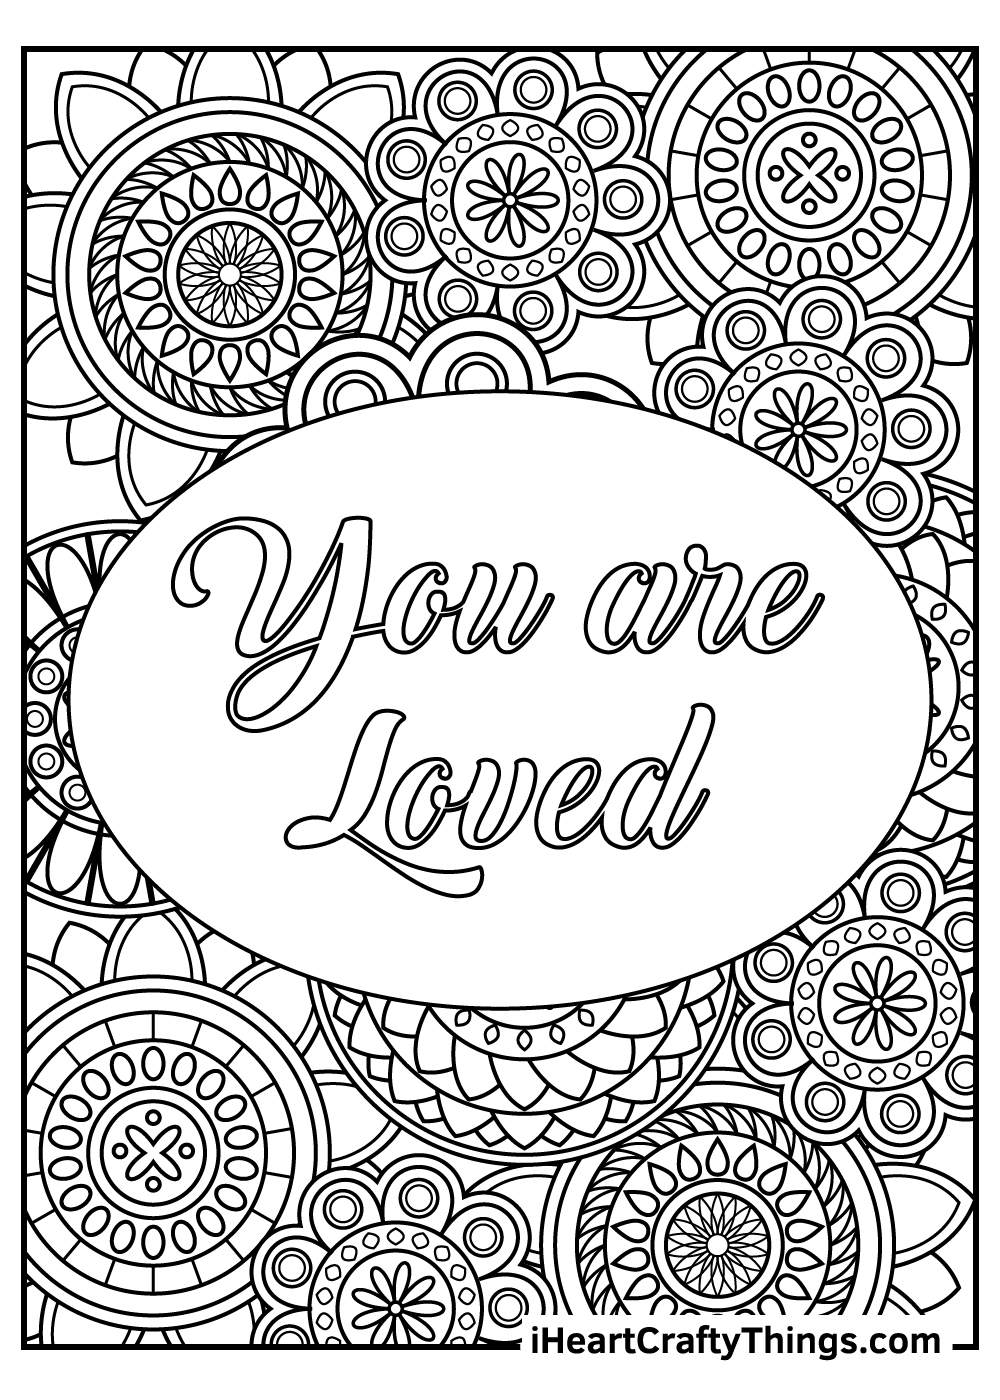 Stress Relief Coloring Pages (Updated 2021)